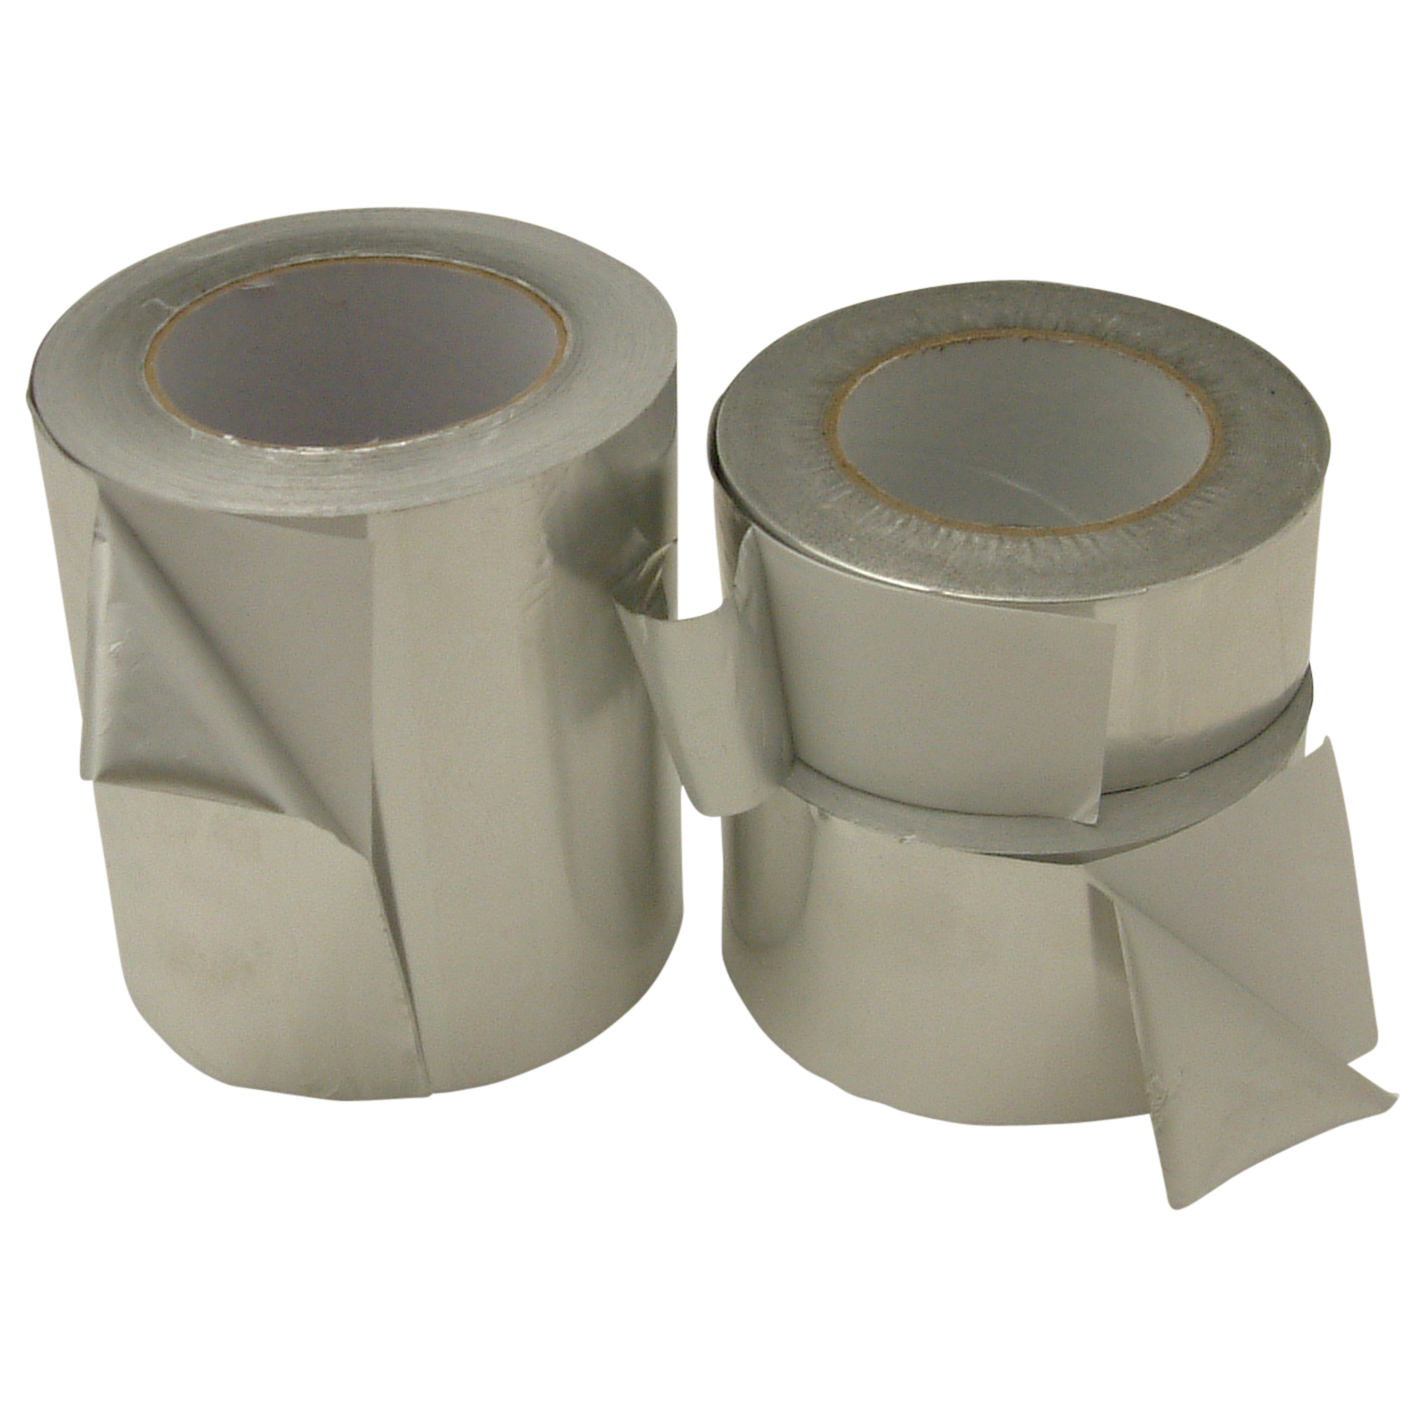 Free Shipping Malleable Foil 4 Rolls Aluminum Foil Tape 3" x 150' With Liner 